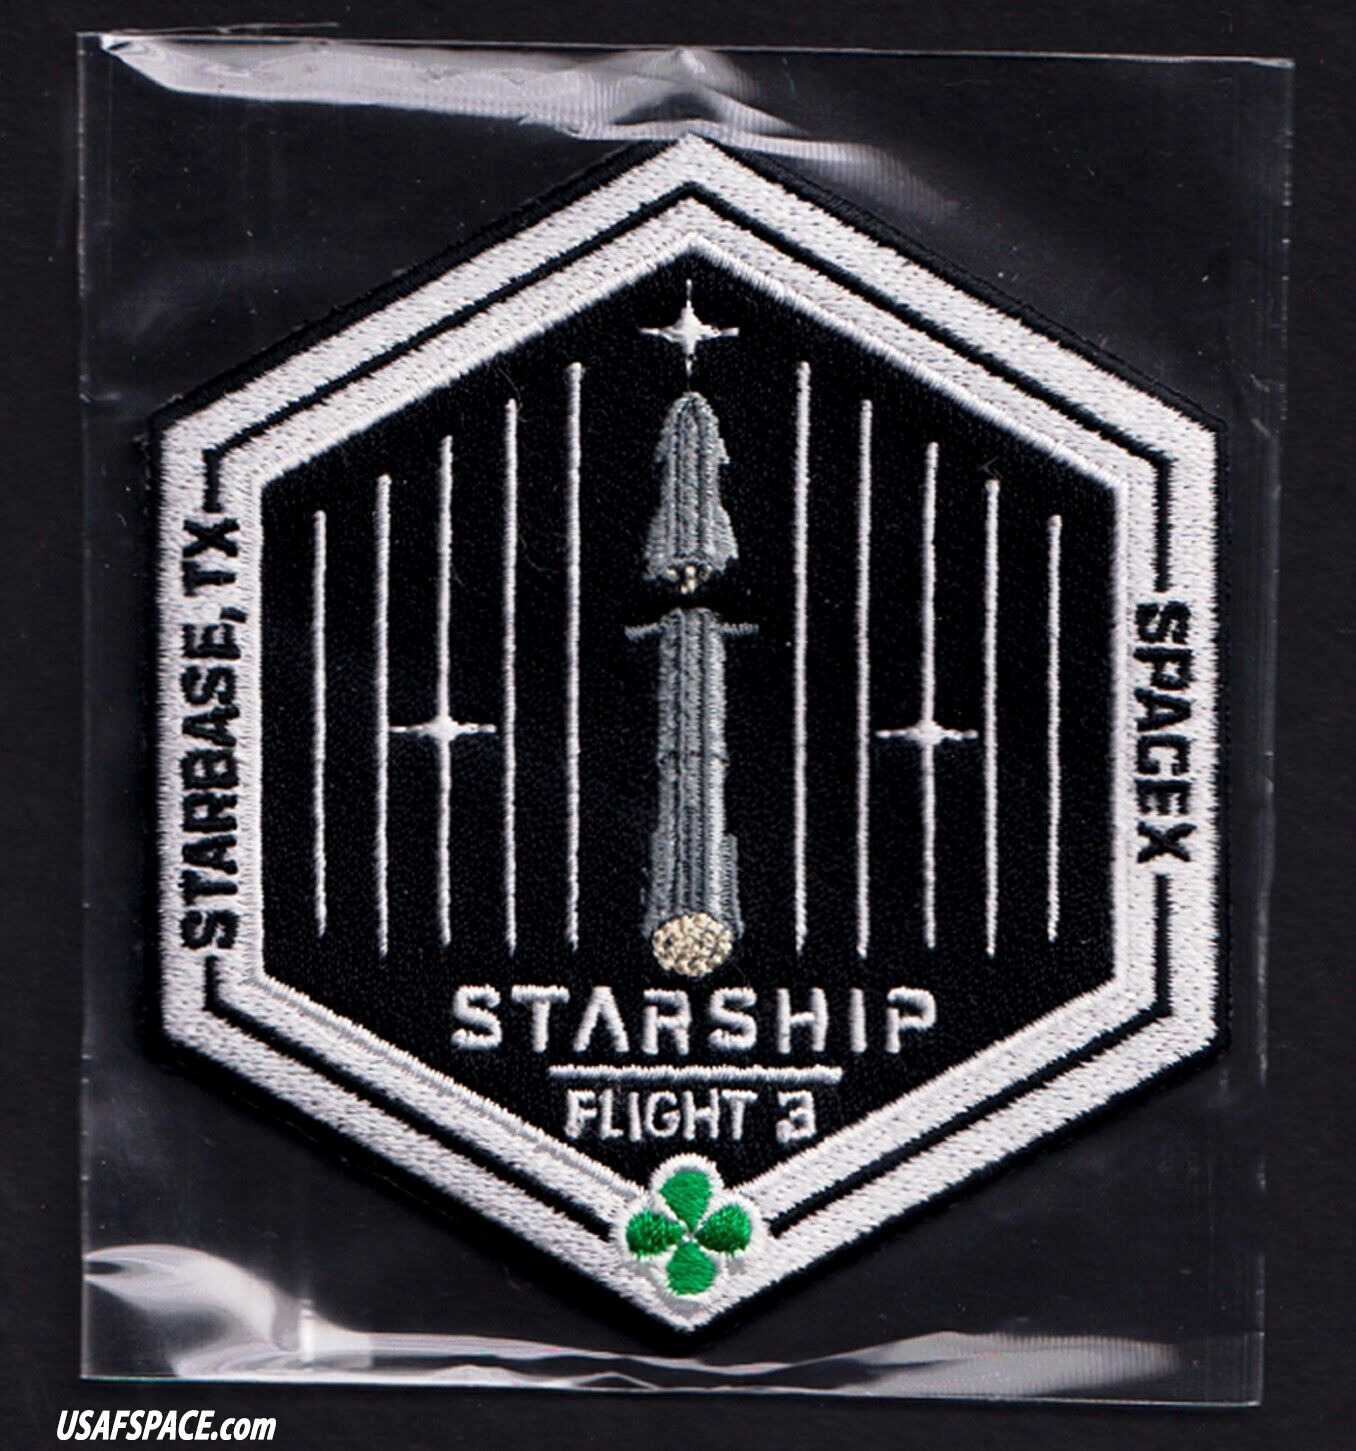 Authentic SPACEX STARSHIP TEST FLIGHT-3 SUPER HEAVY STARBASE, TX Mission PATCH